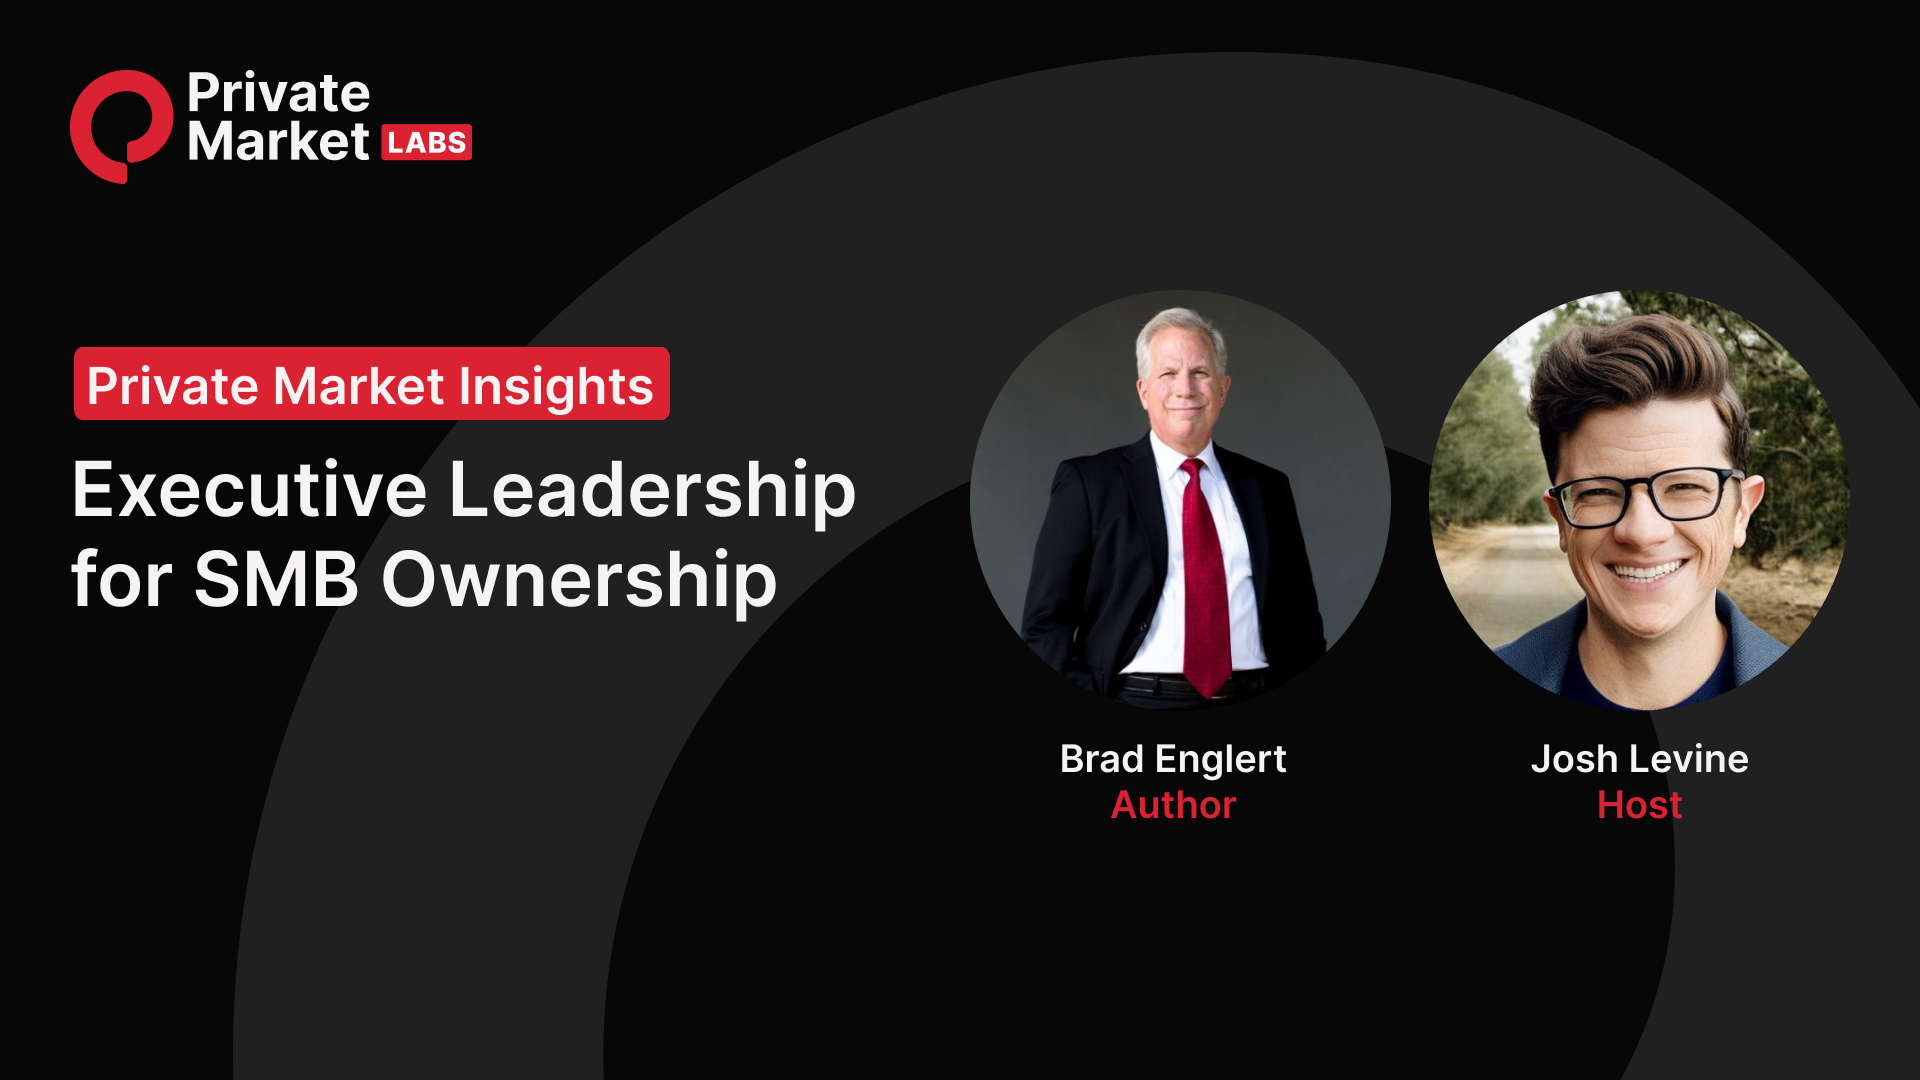 Executive Leadership for SMB Ownership with Brad Englert